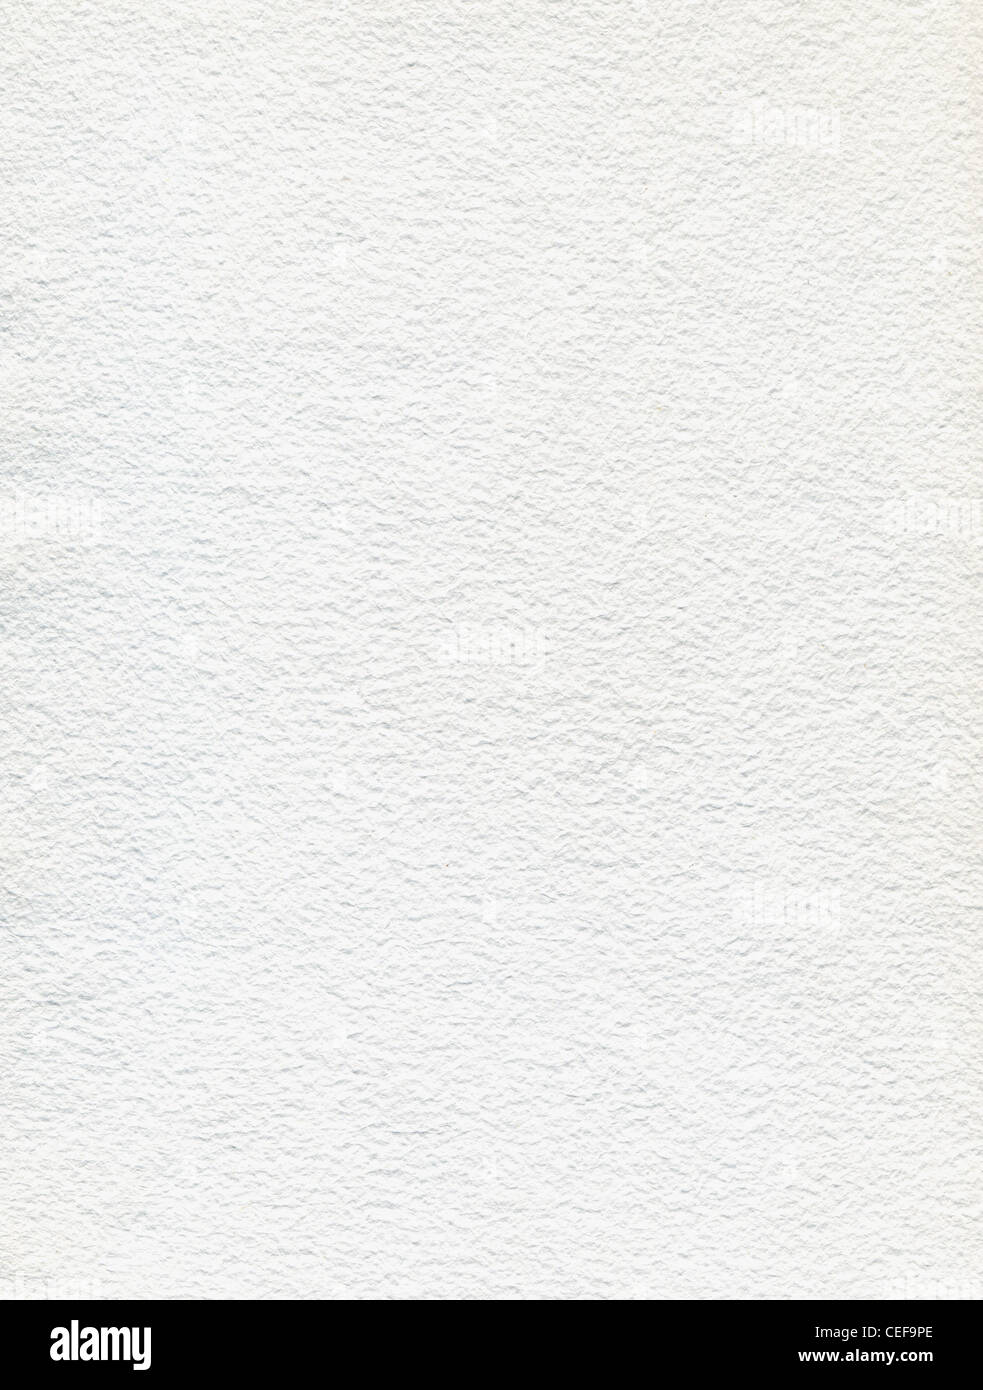 Handmade white paper, abstract blank neutral background Stock Photo